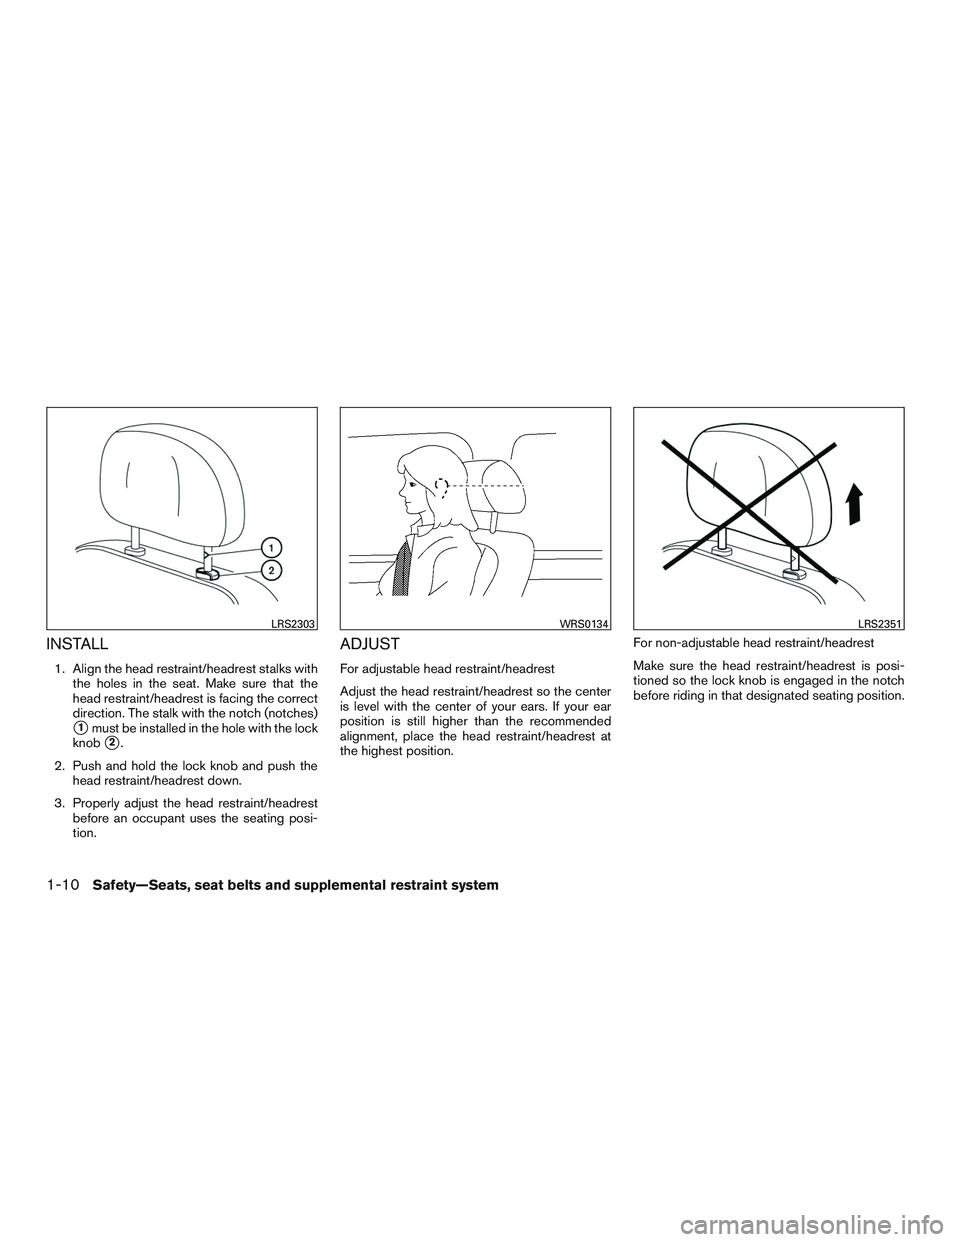 NISSAN ALTIMA SEDAN 2017  Owners Manual INSTALL
1. Align the head restraint/headrest stalks withthe holes in the seat. Make sure that the
head restraint/headrest is facing the correct
direction. The stalk with the notch (notches)
1must be 